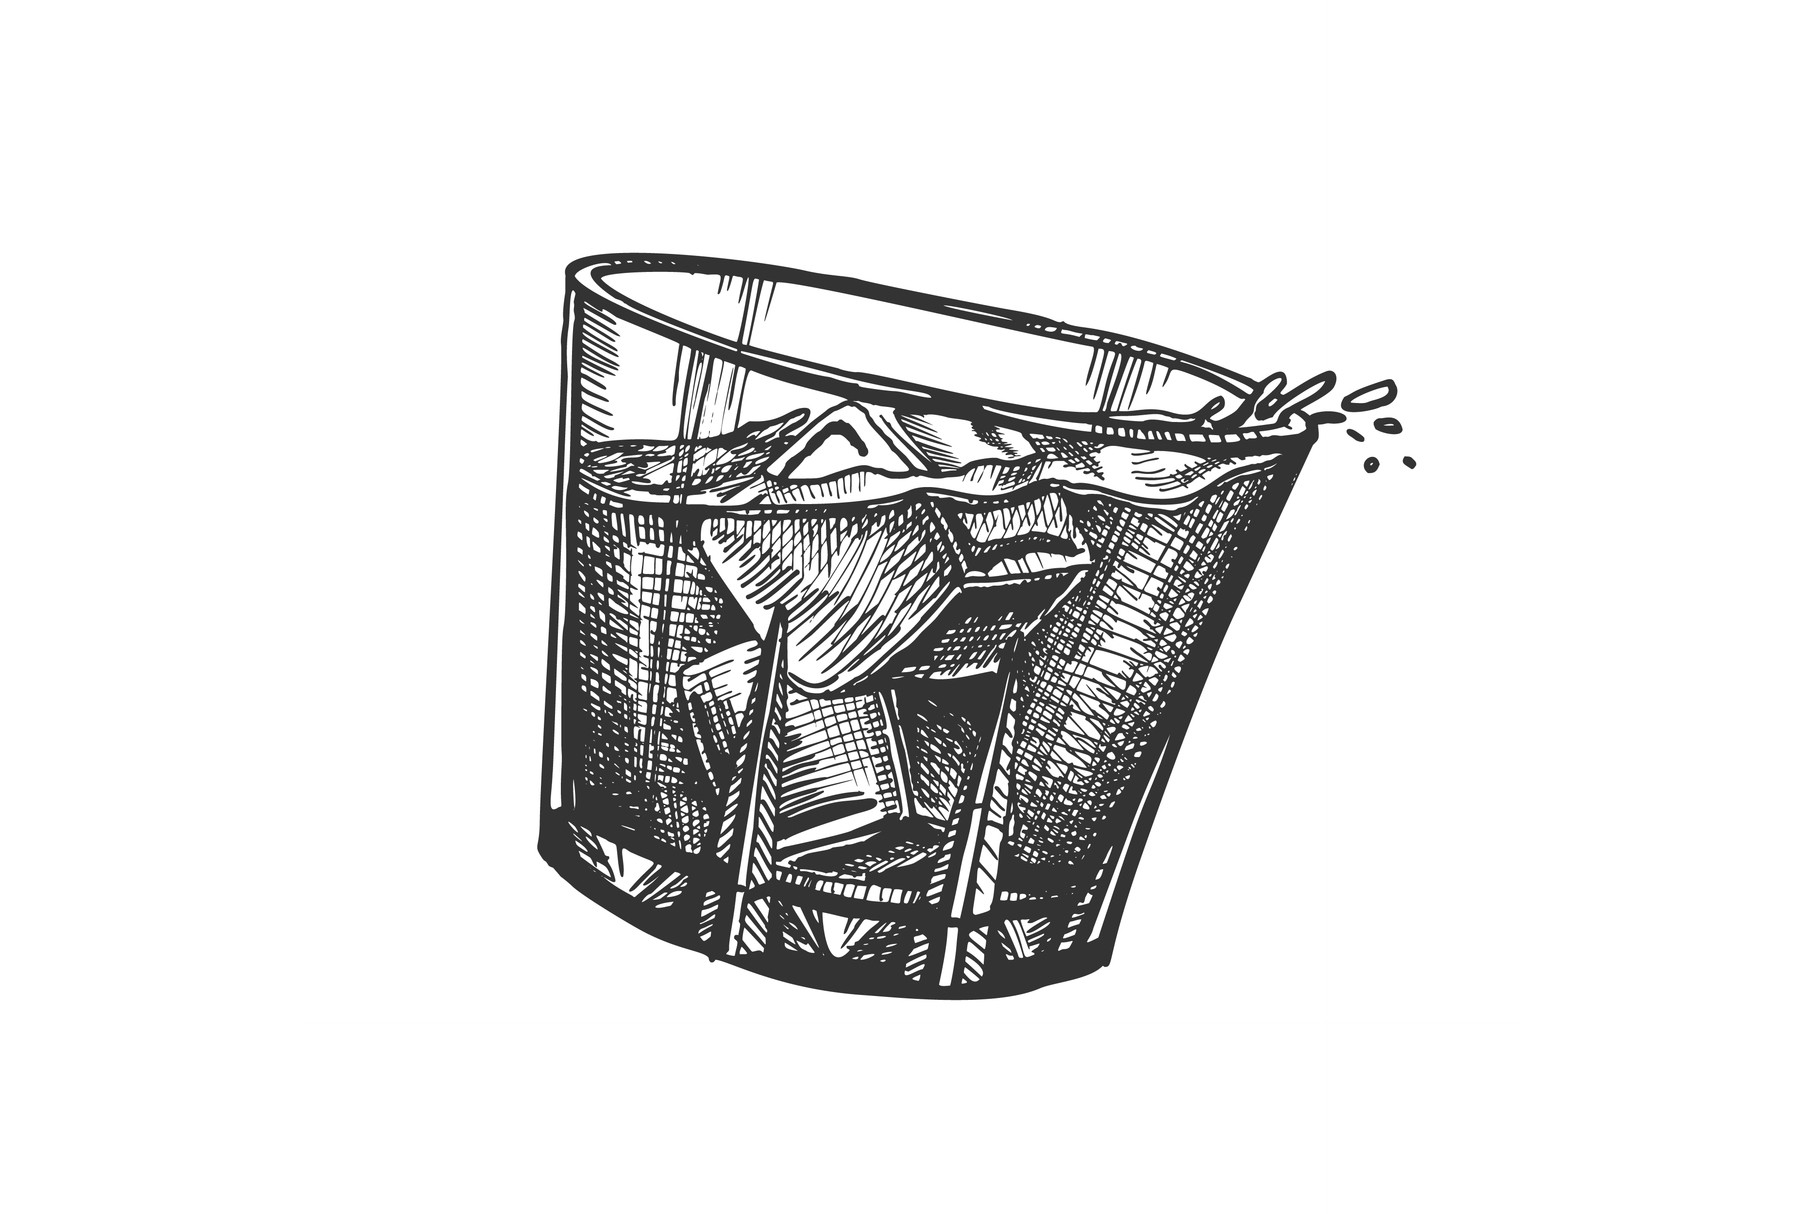 https://www.creativefabrica.com/wp-content/uploads/2022/01/21/Design-Glass-With-Whisky-And-Ice-Cubes-Graphics-23865598-1.jpg